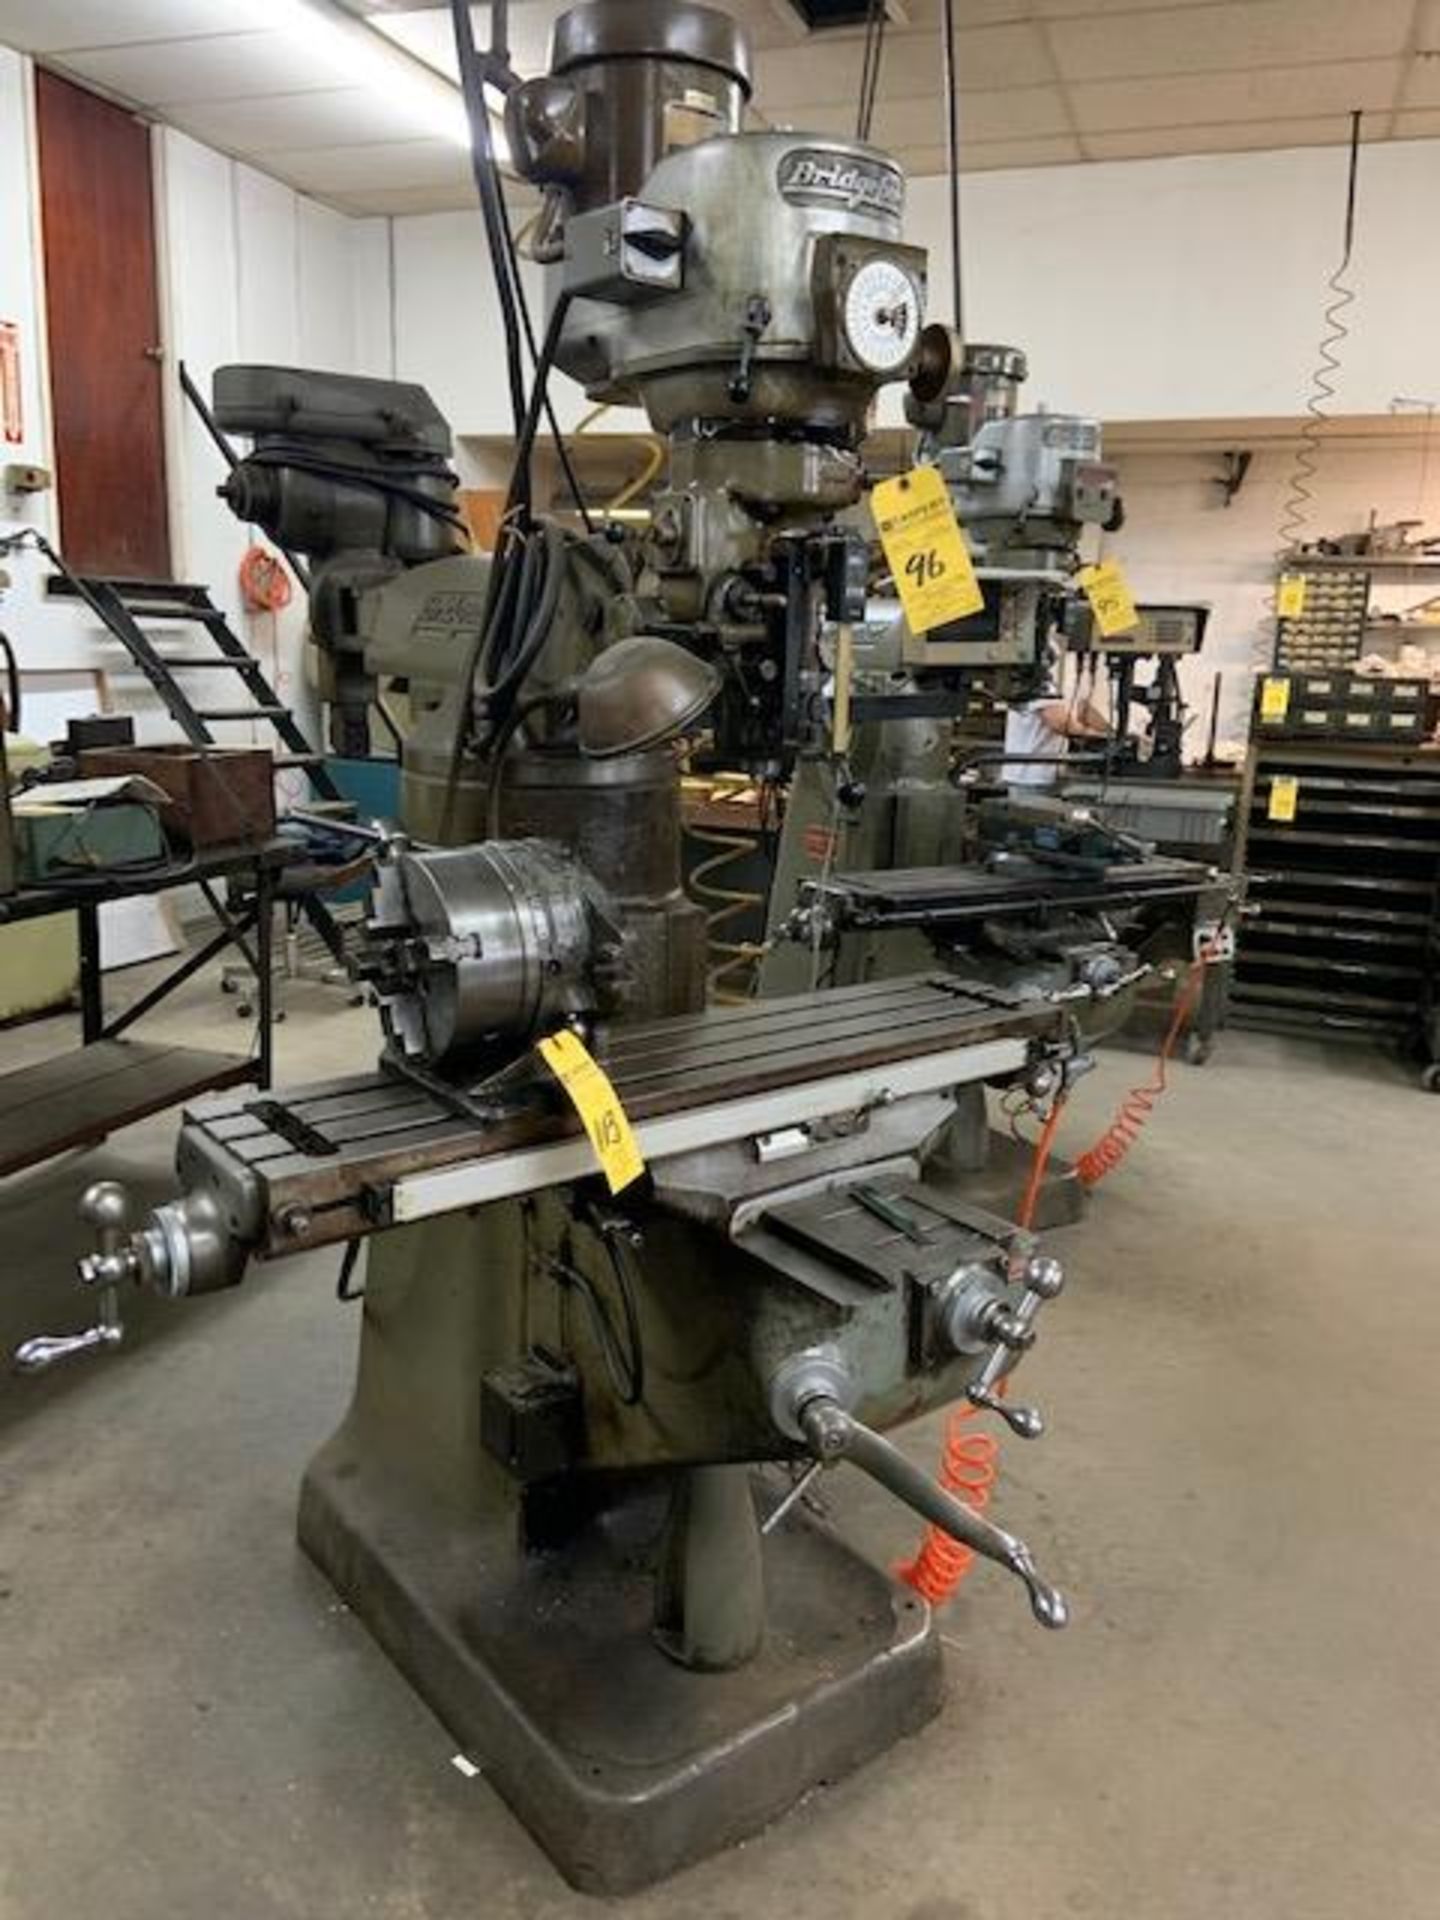 BRT Milling Machine J-23049 w. 572 Series Digimatic Read Out, 12/BR 12-005, 9" x 42" T-Slot Table - Image 2 of 2